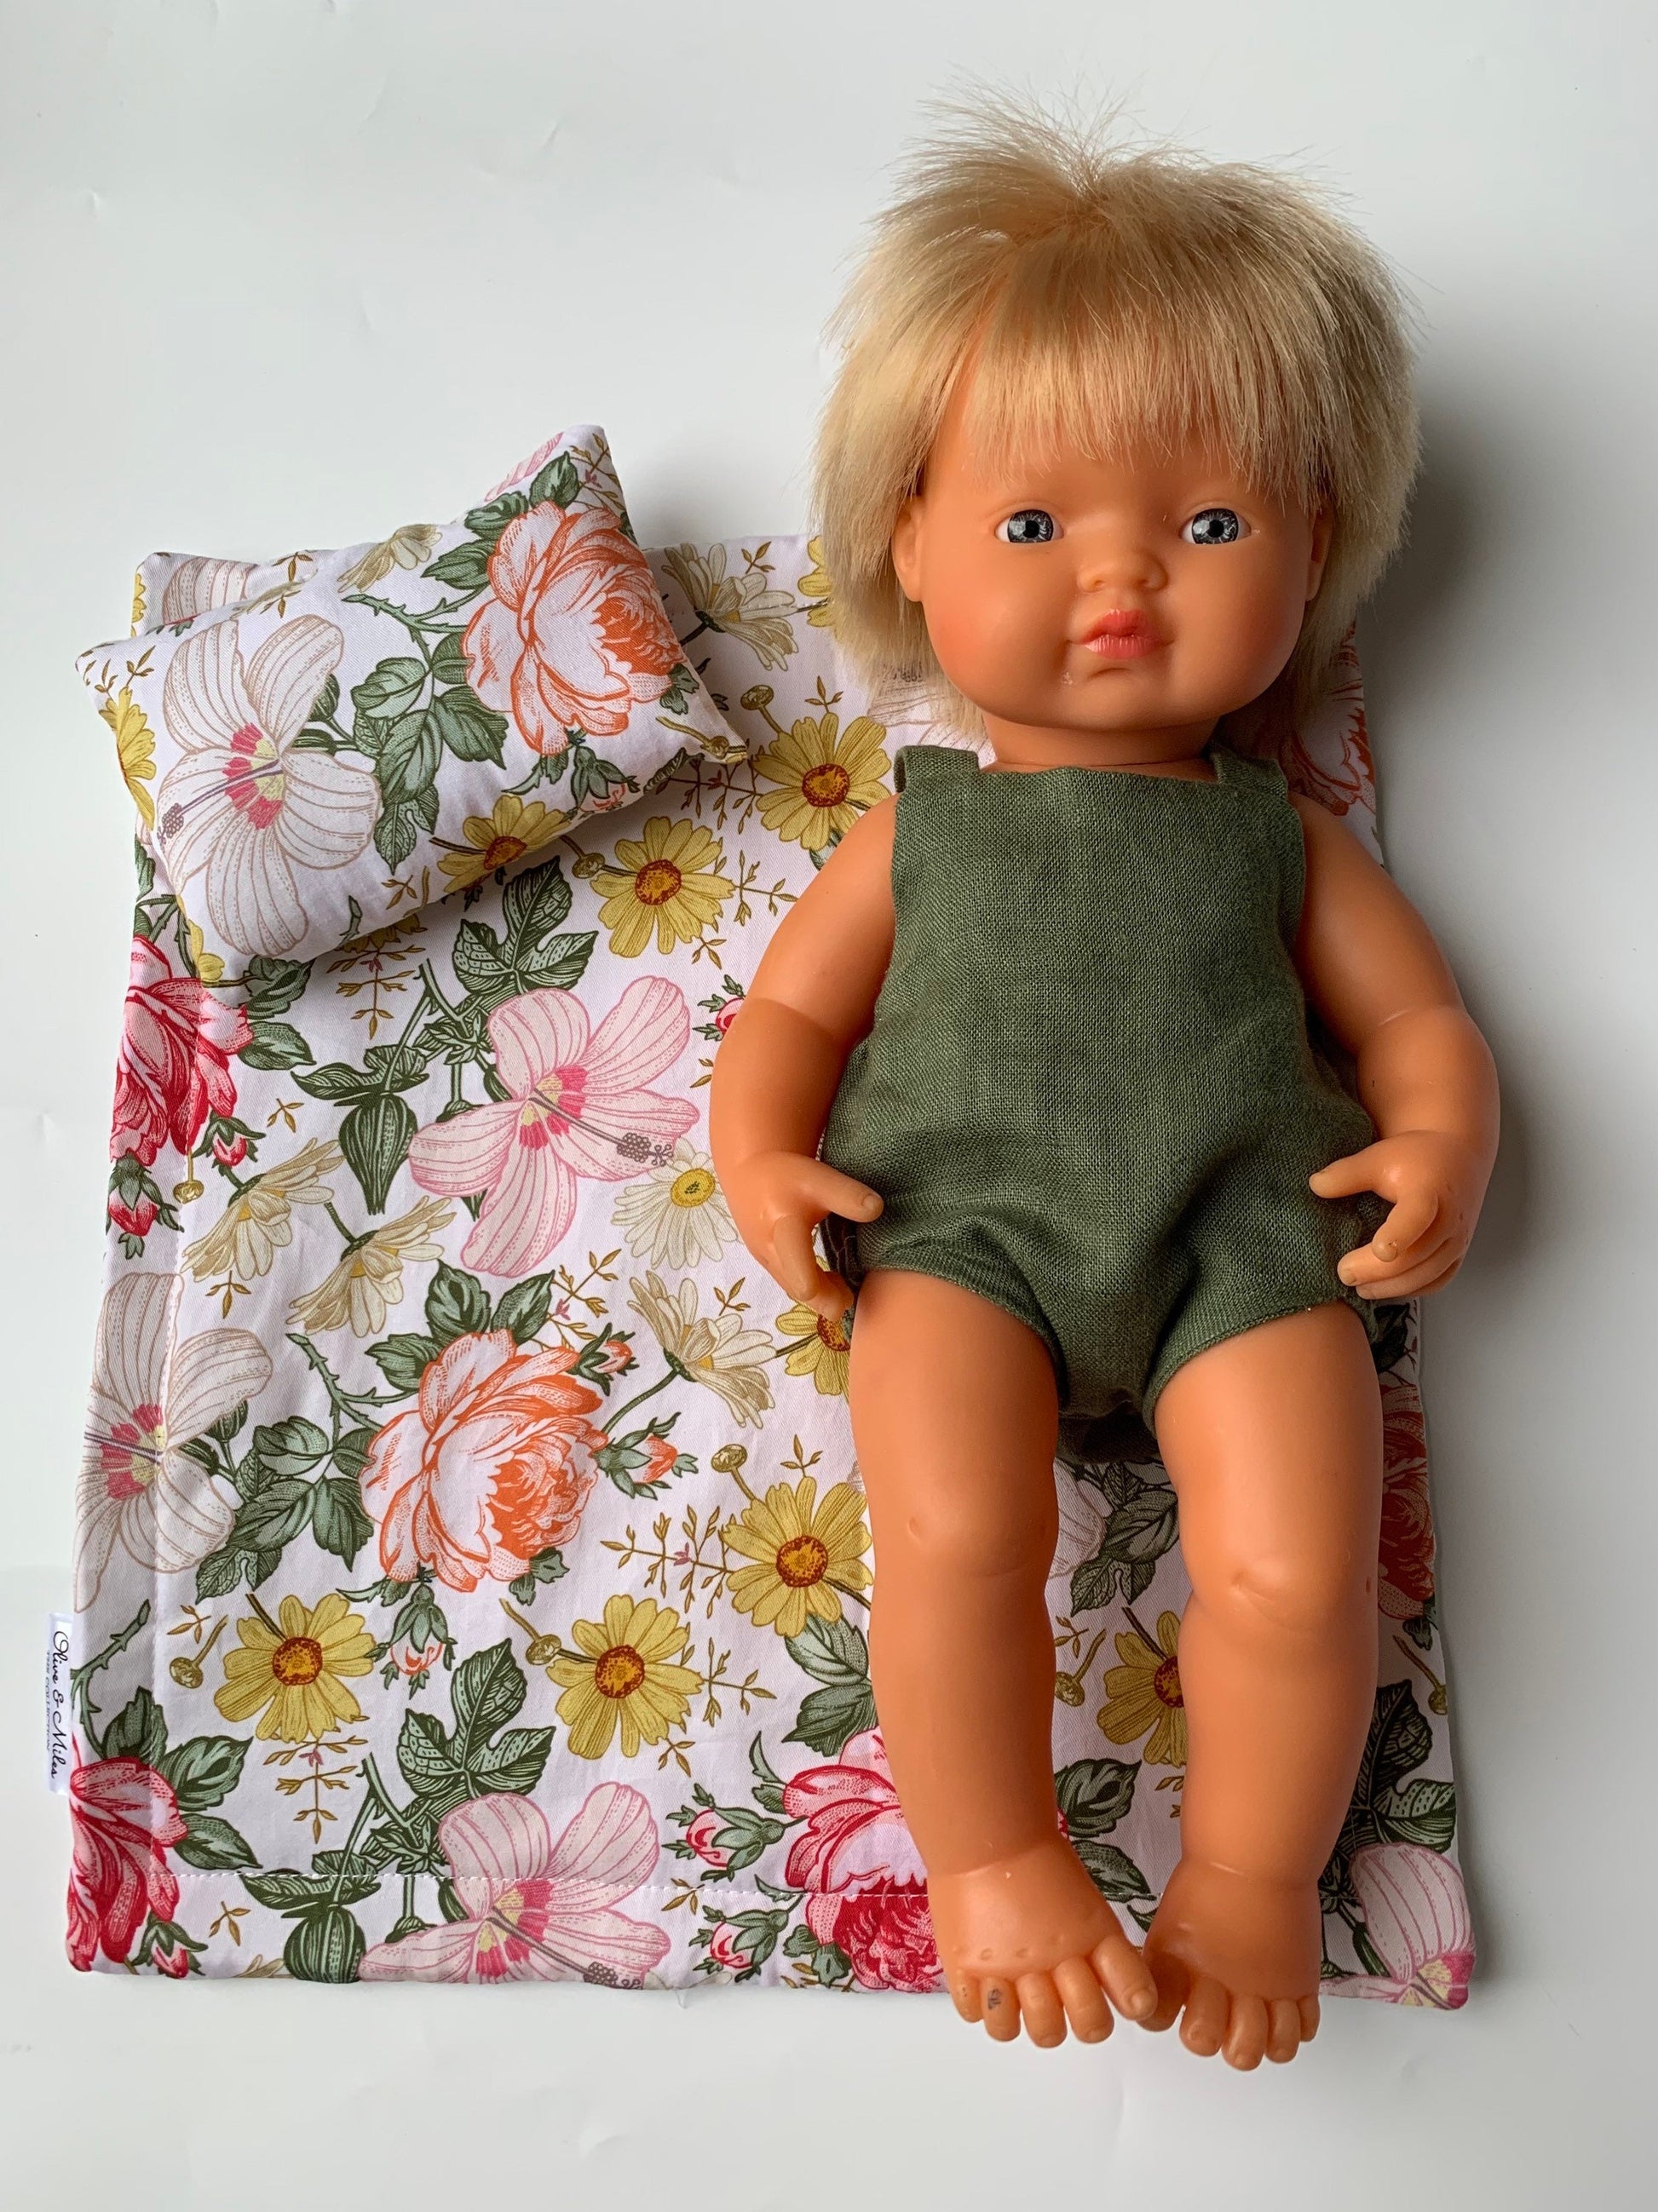 Doll Bed pillow blanket - Peony daisy bed cot quilt